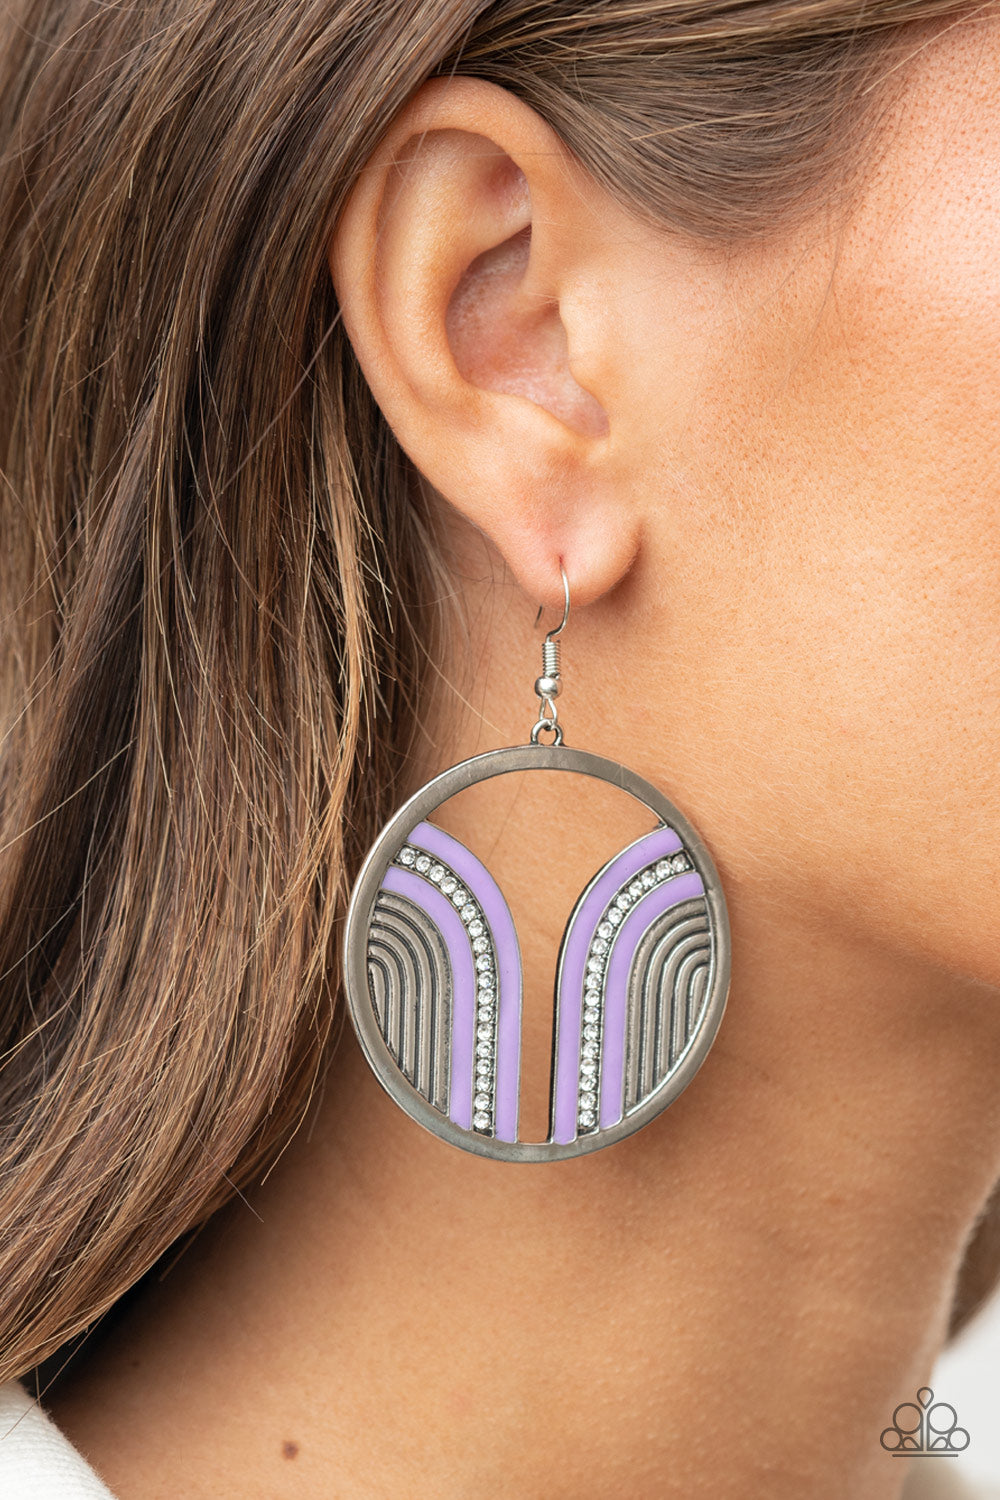 Delightfully Deco Purple Earring - Paparazzi Accessories.  Infused with a glittery row of white rhinestones, shiny purple arcs curve into juxtaposed frames inside a classic silver hoop, creating a colorful art deco inspired centerpiece. Earring attaches to a standard fishhook fitting.  ﻿﻿﻿All Paparazzi Accessories are lead free and nickel free!  Sold as one pair of earrings.